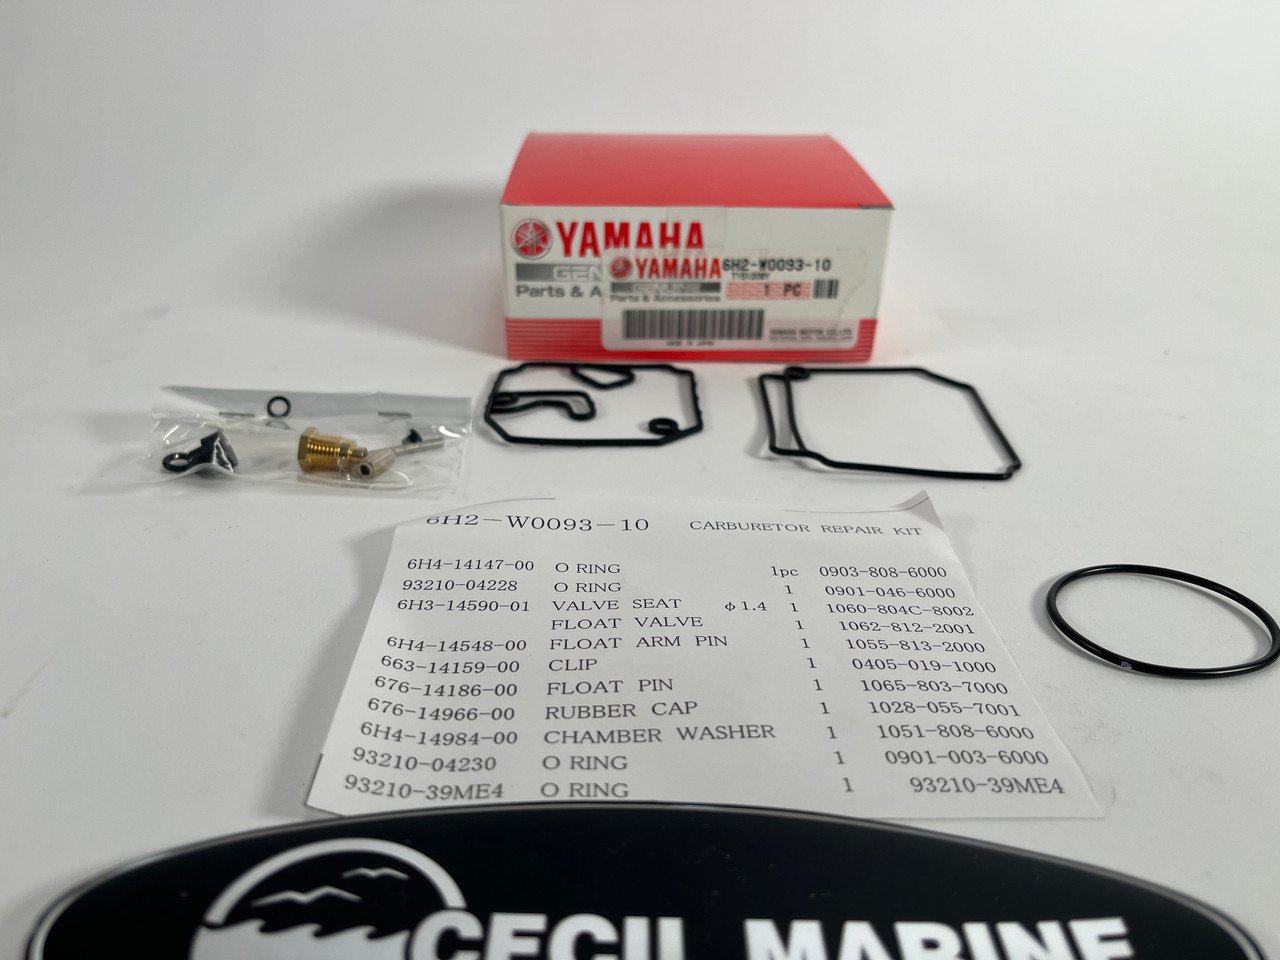 $49.99* GENUINE YAMAHA  CARB REPAIR KIT 6H2-W0093-10-00  *In Stock & Ready To Ship!